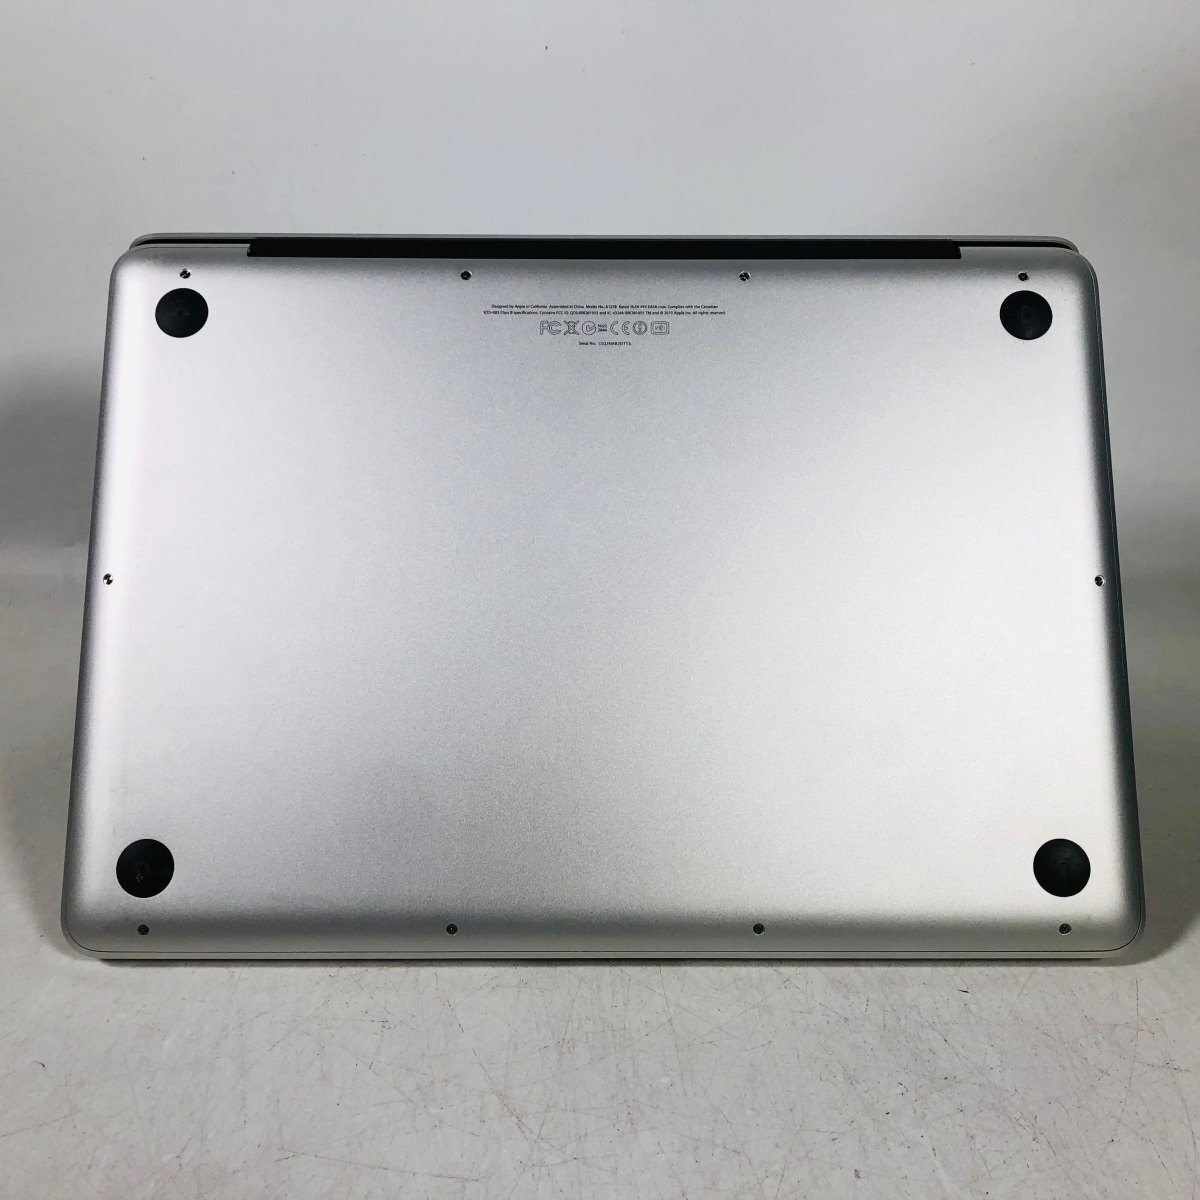  operation verification ending MacBook Pro 13 -inch (Mid 2012) Core i5 2.5GHz/4GB/500GB MD101J/A